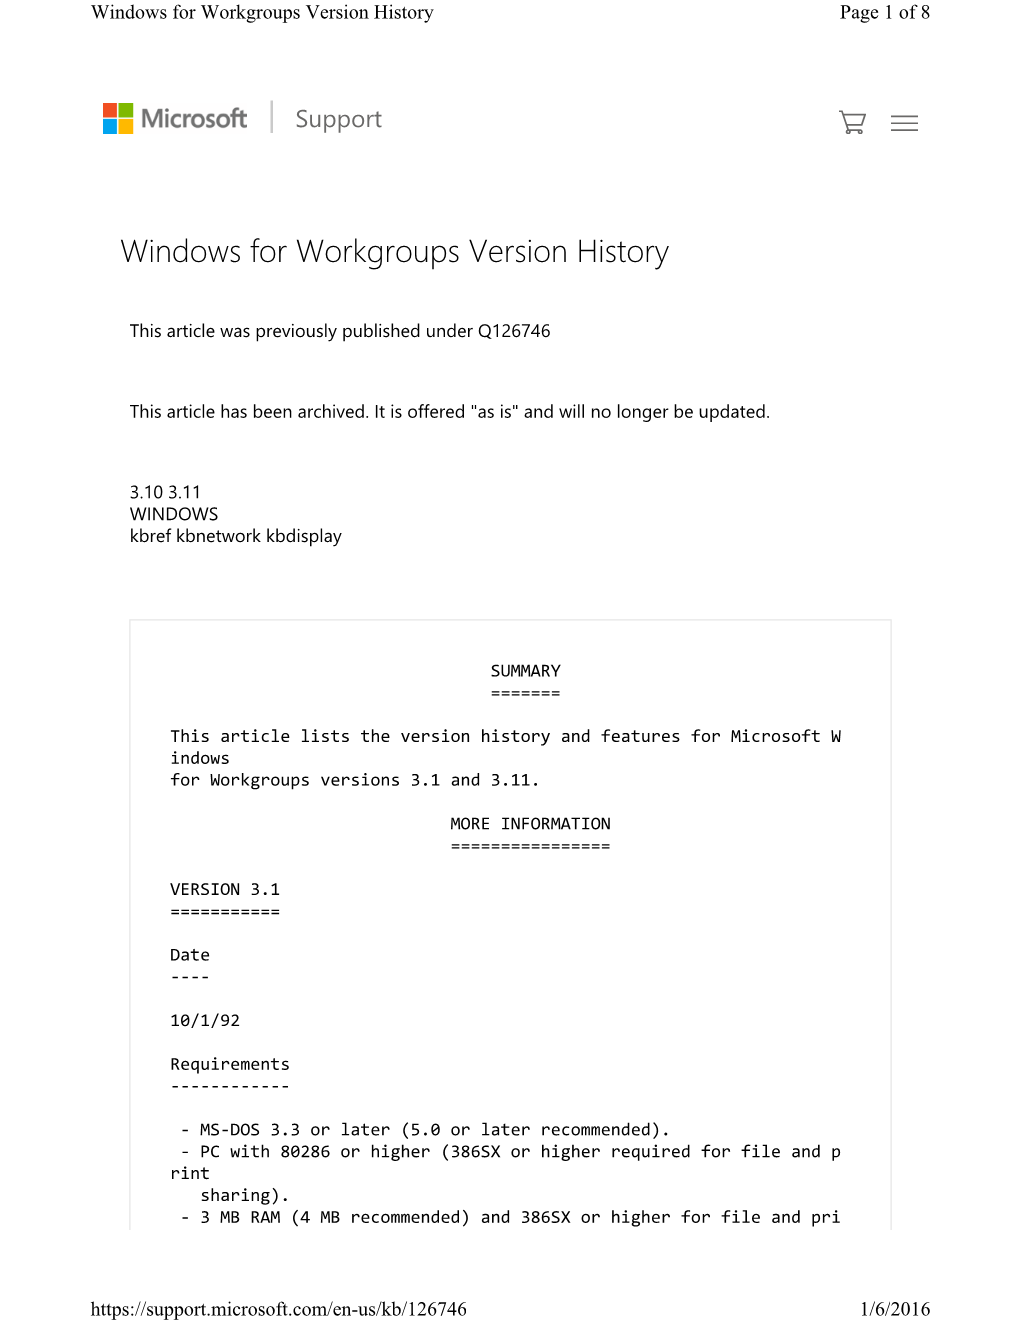 Windows for Workgroups Requirements and Features